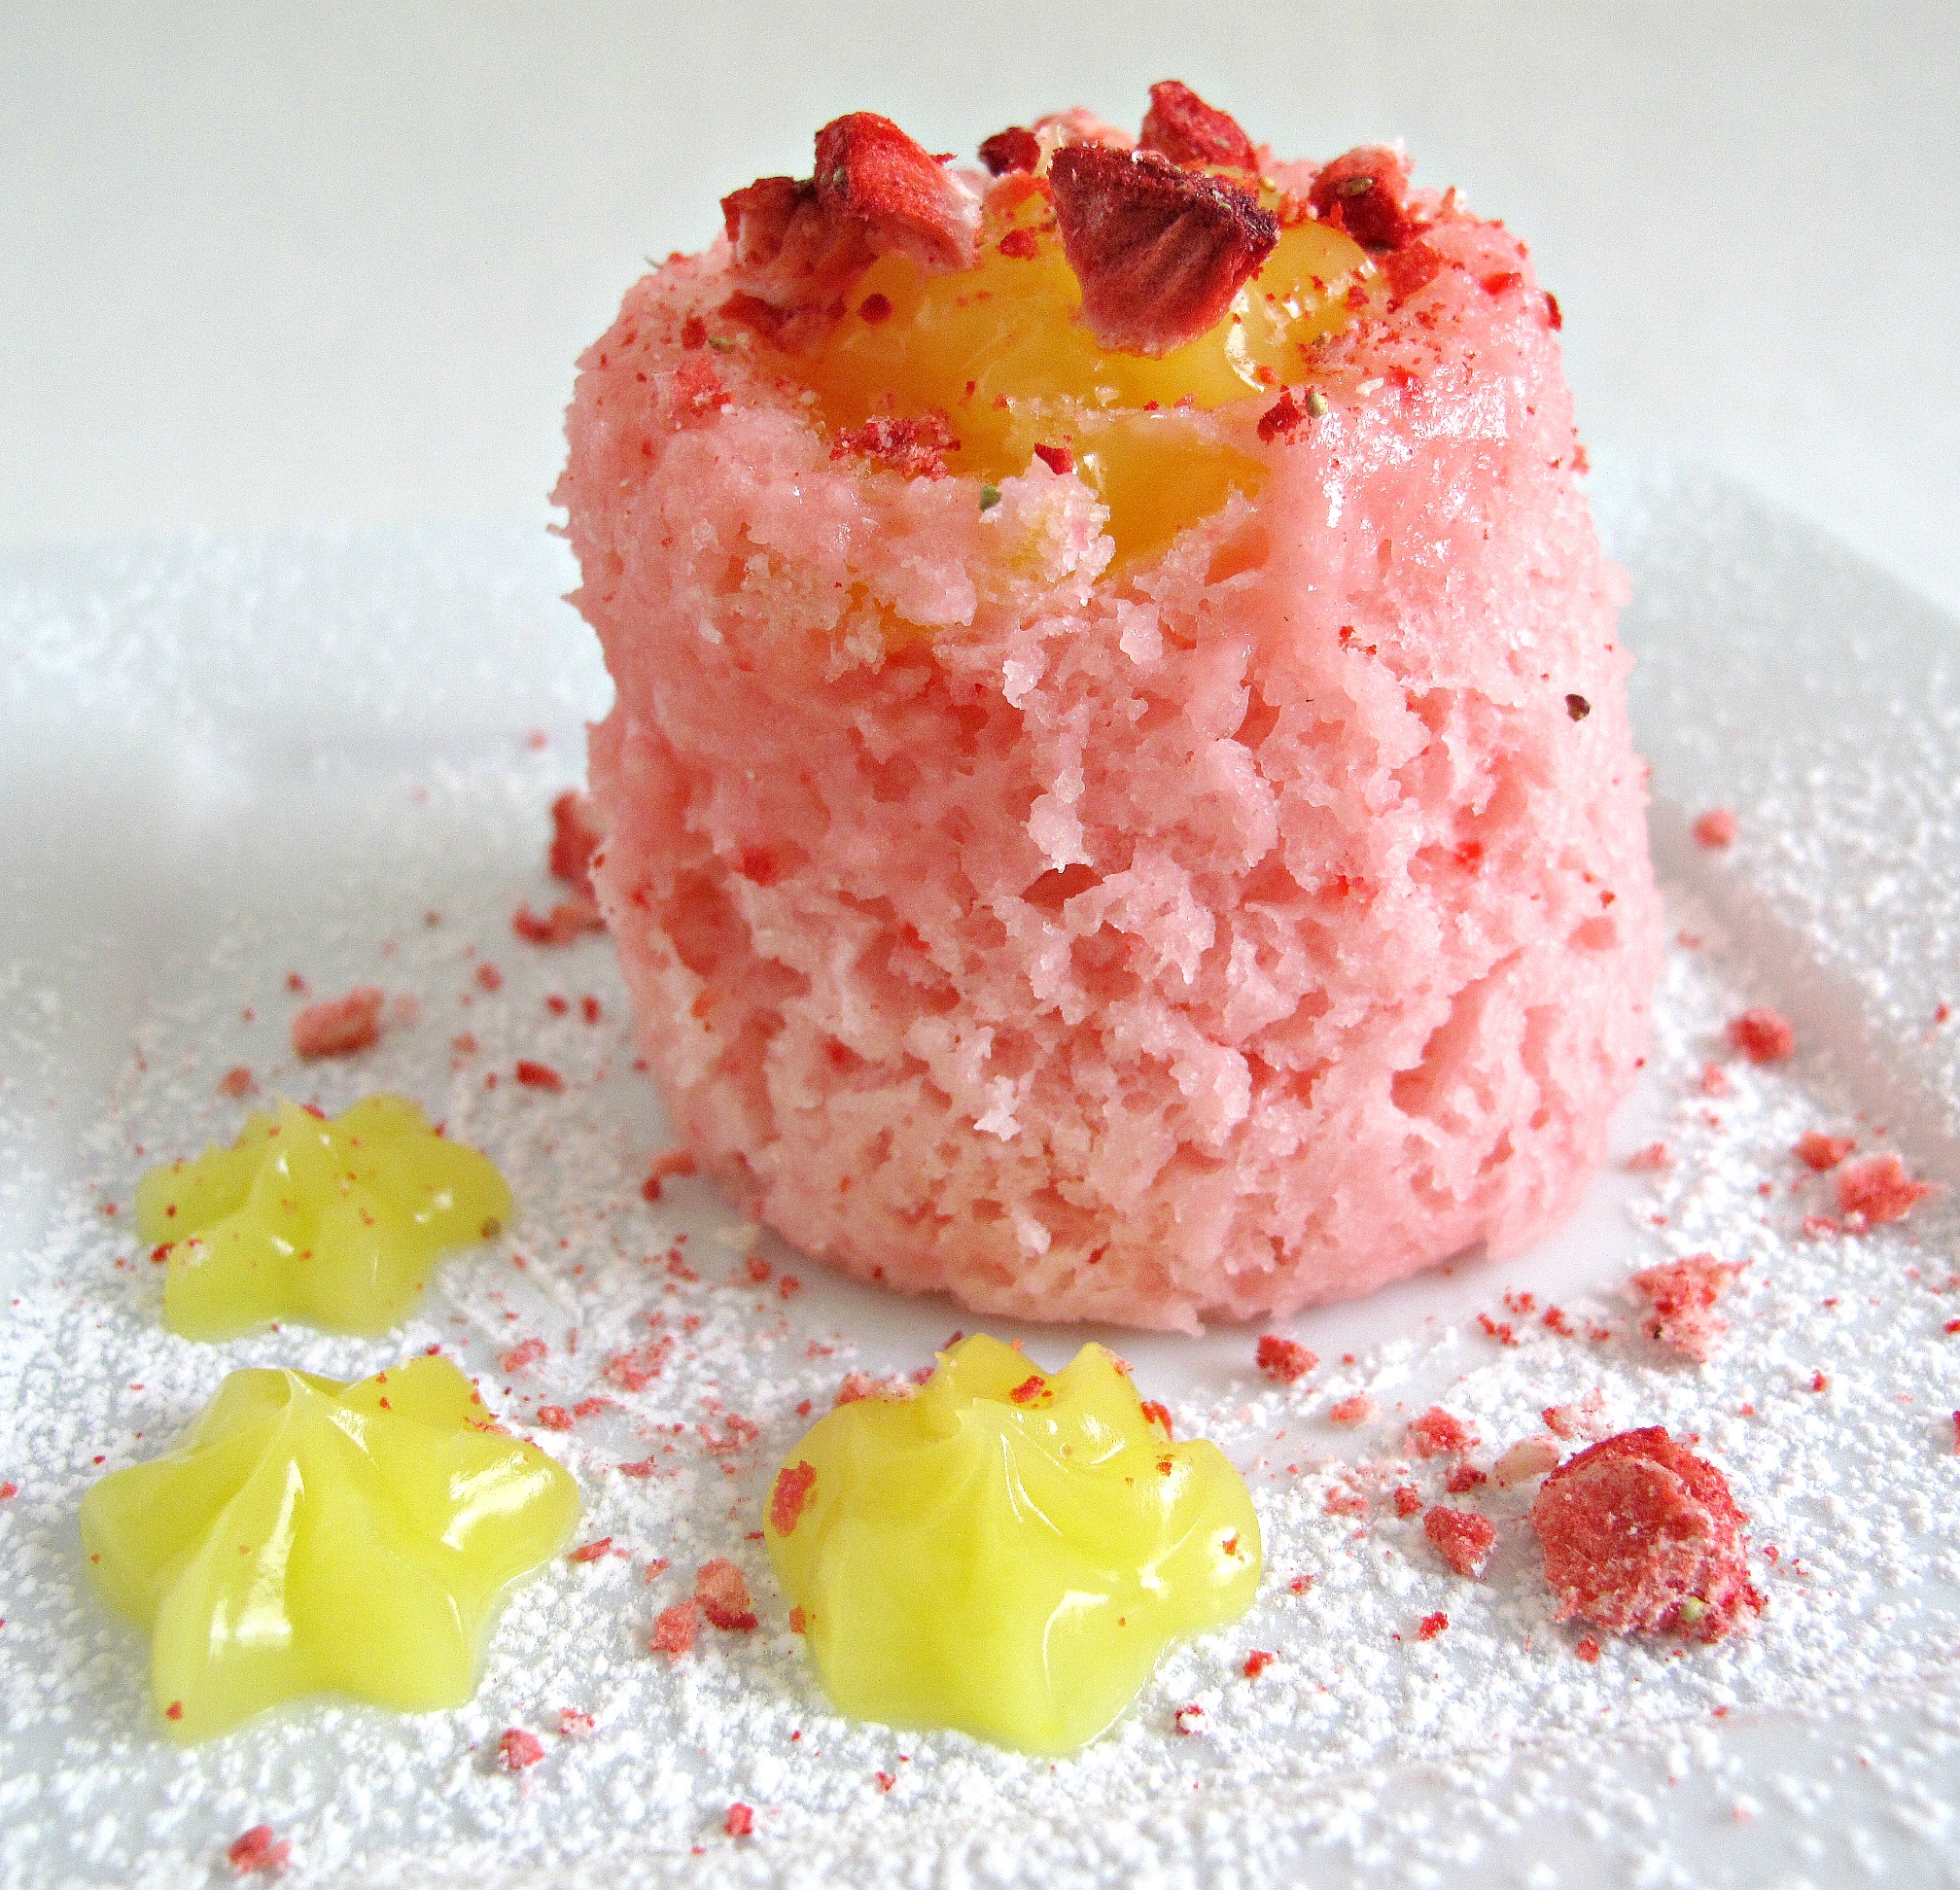 Fluffy, pink cake on a plate sprinkled with powdered sugar, freeze dried strawberries, and lemon curd.